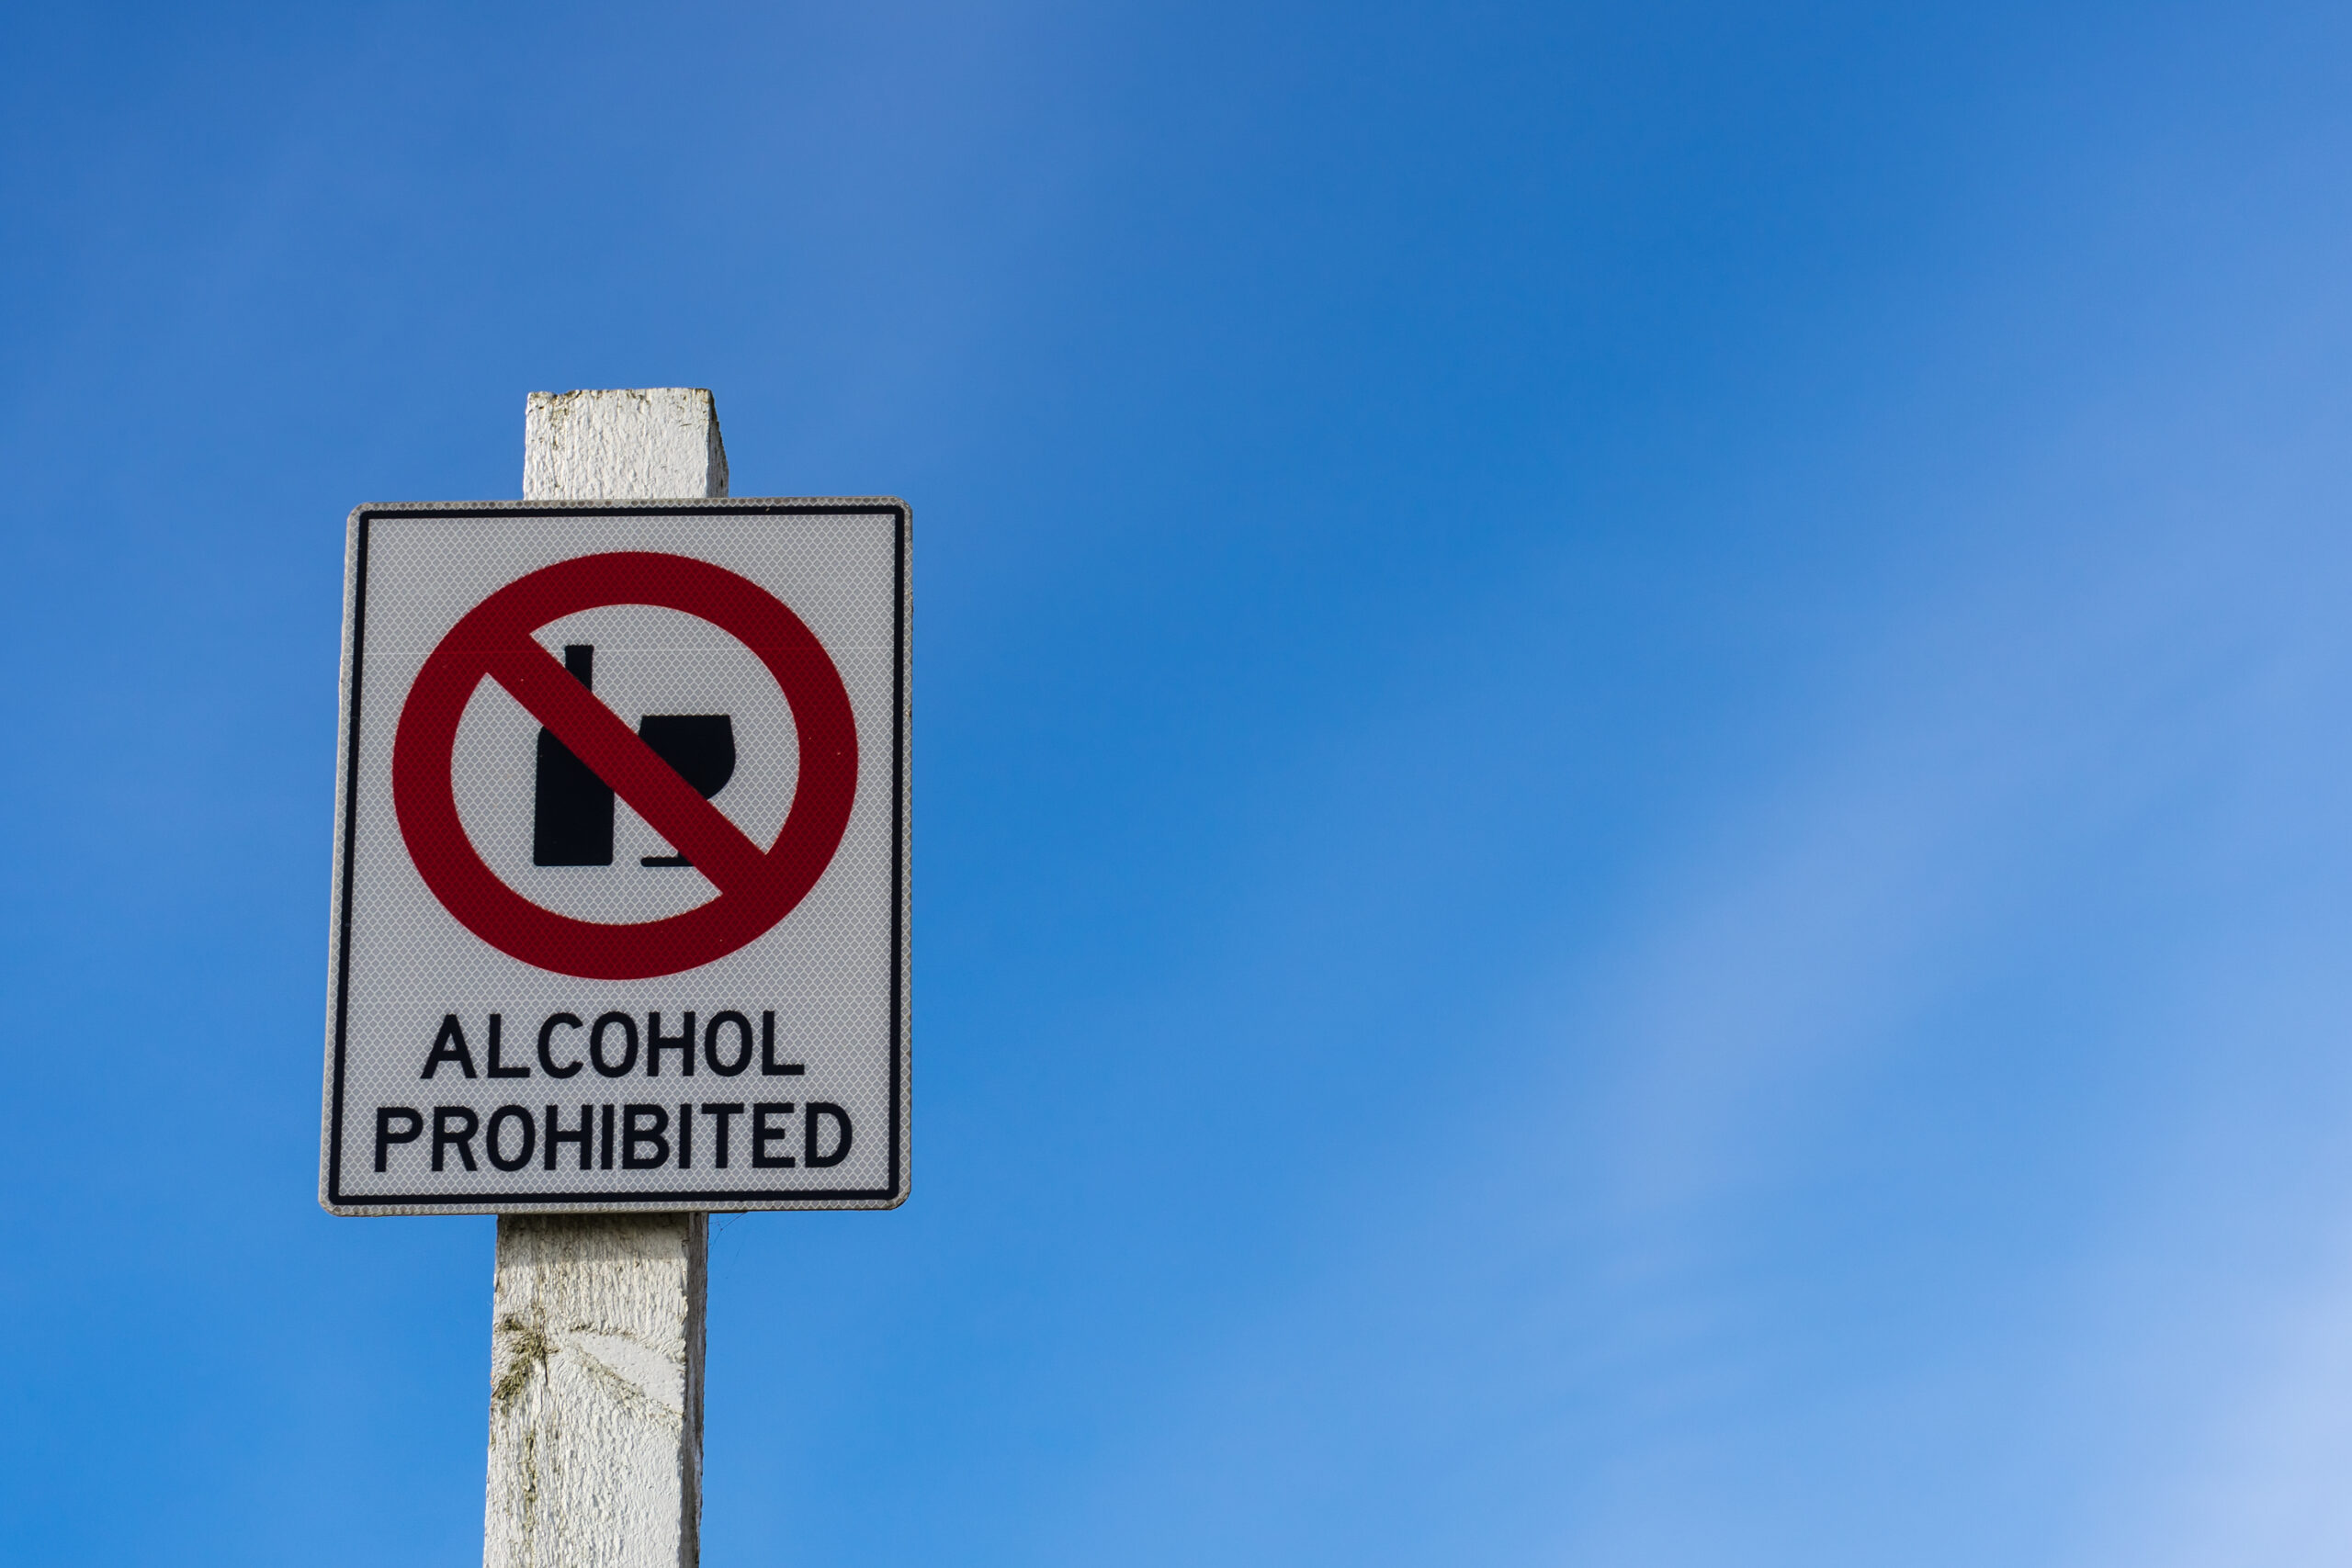 Belgium to introduce plans to cut alcohol overconsumption among young people